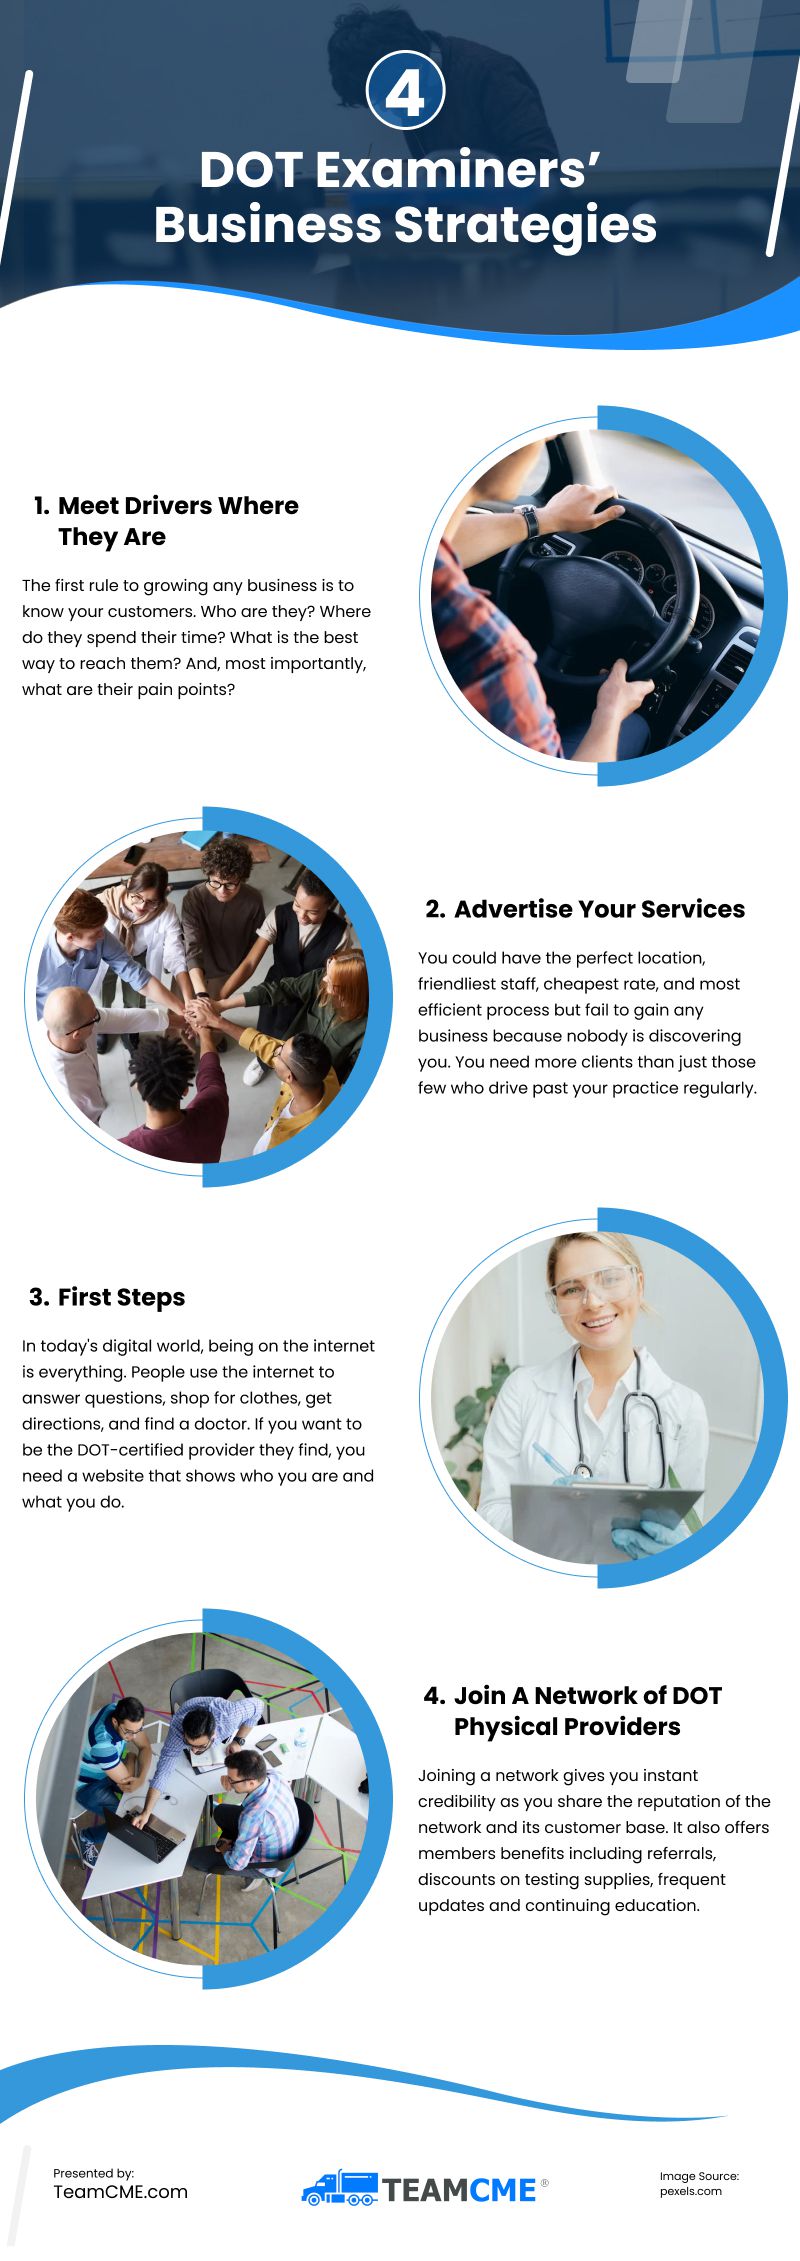 4 DOT Examiners Business Strategies Infographic